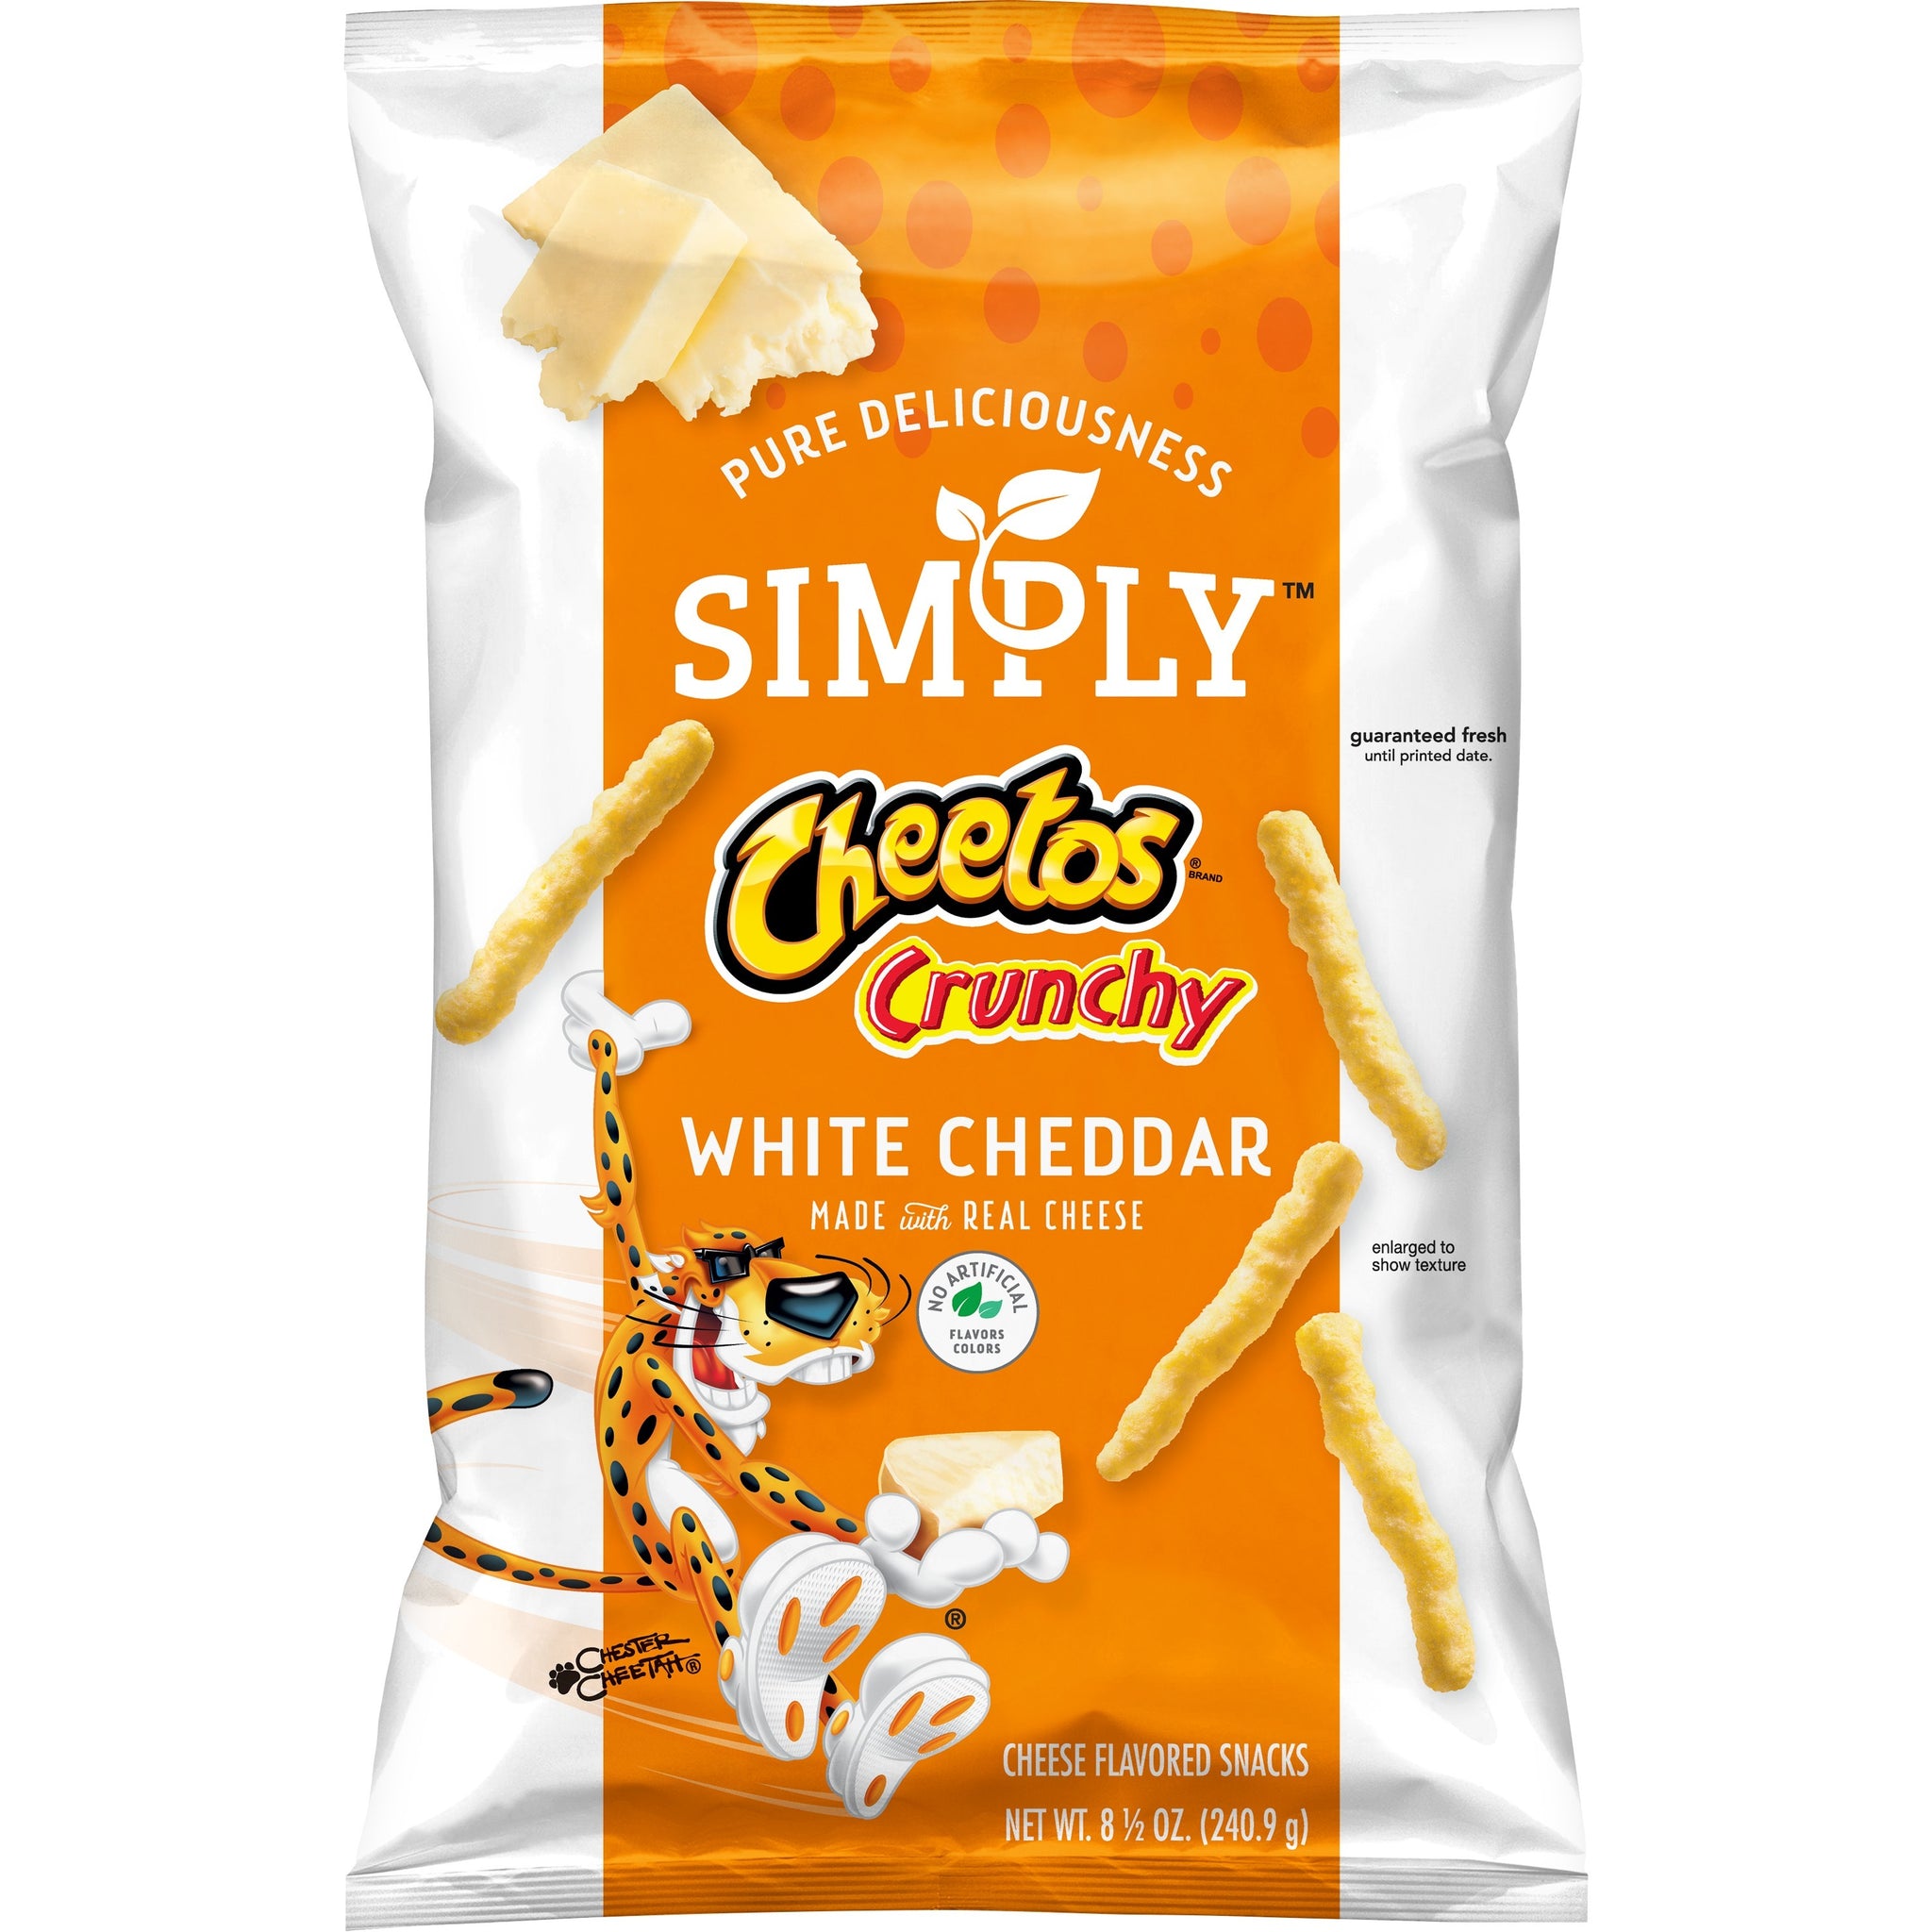 Simply Cheetos White Cheddar Crunchy Cheese Flavored Snacks, Bag